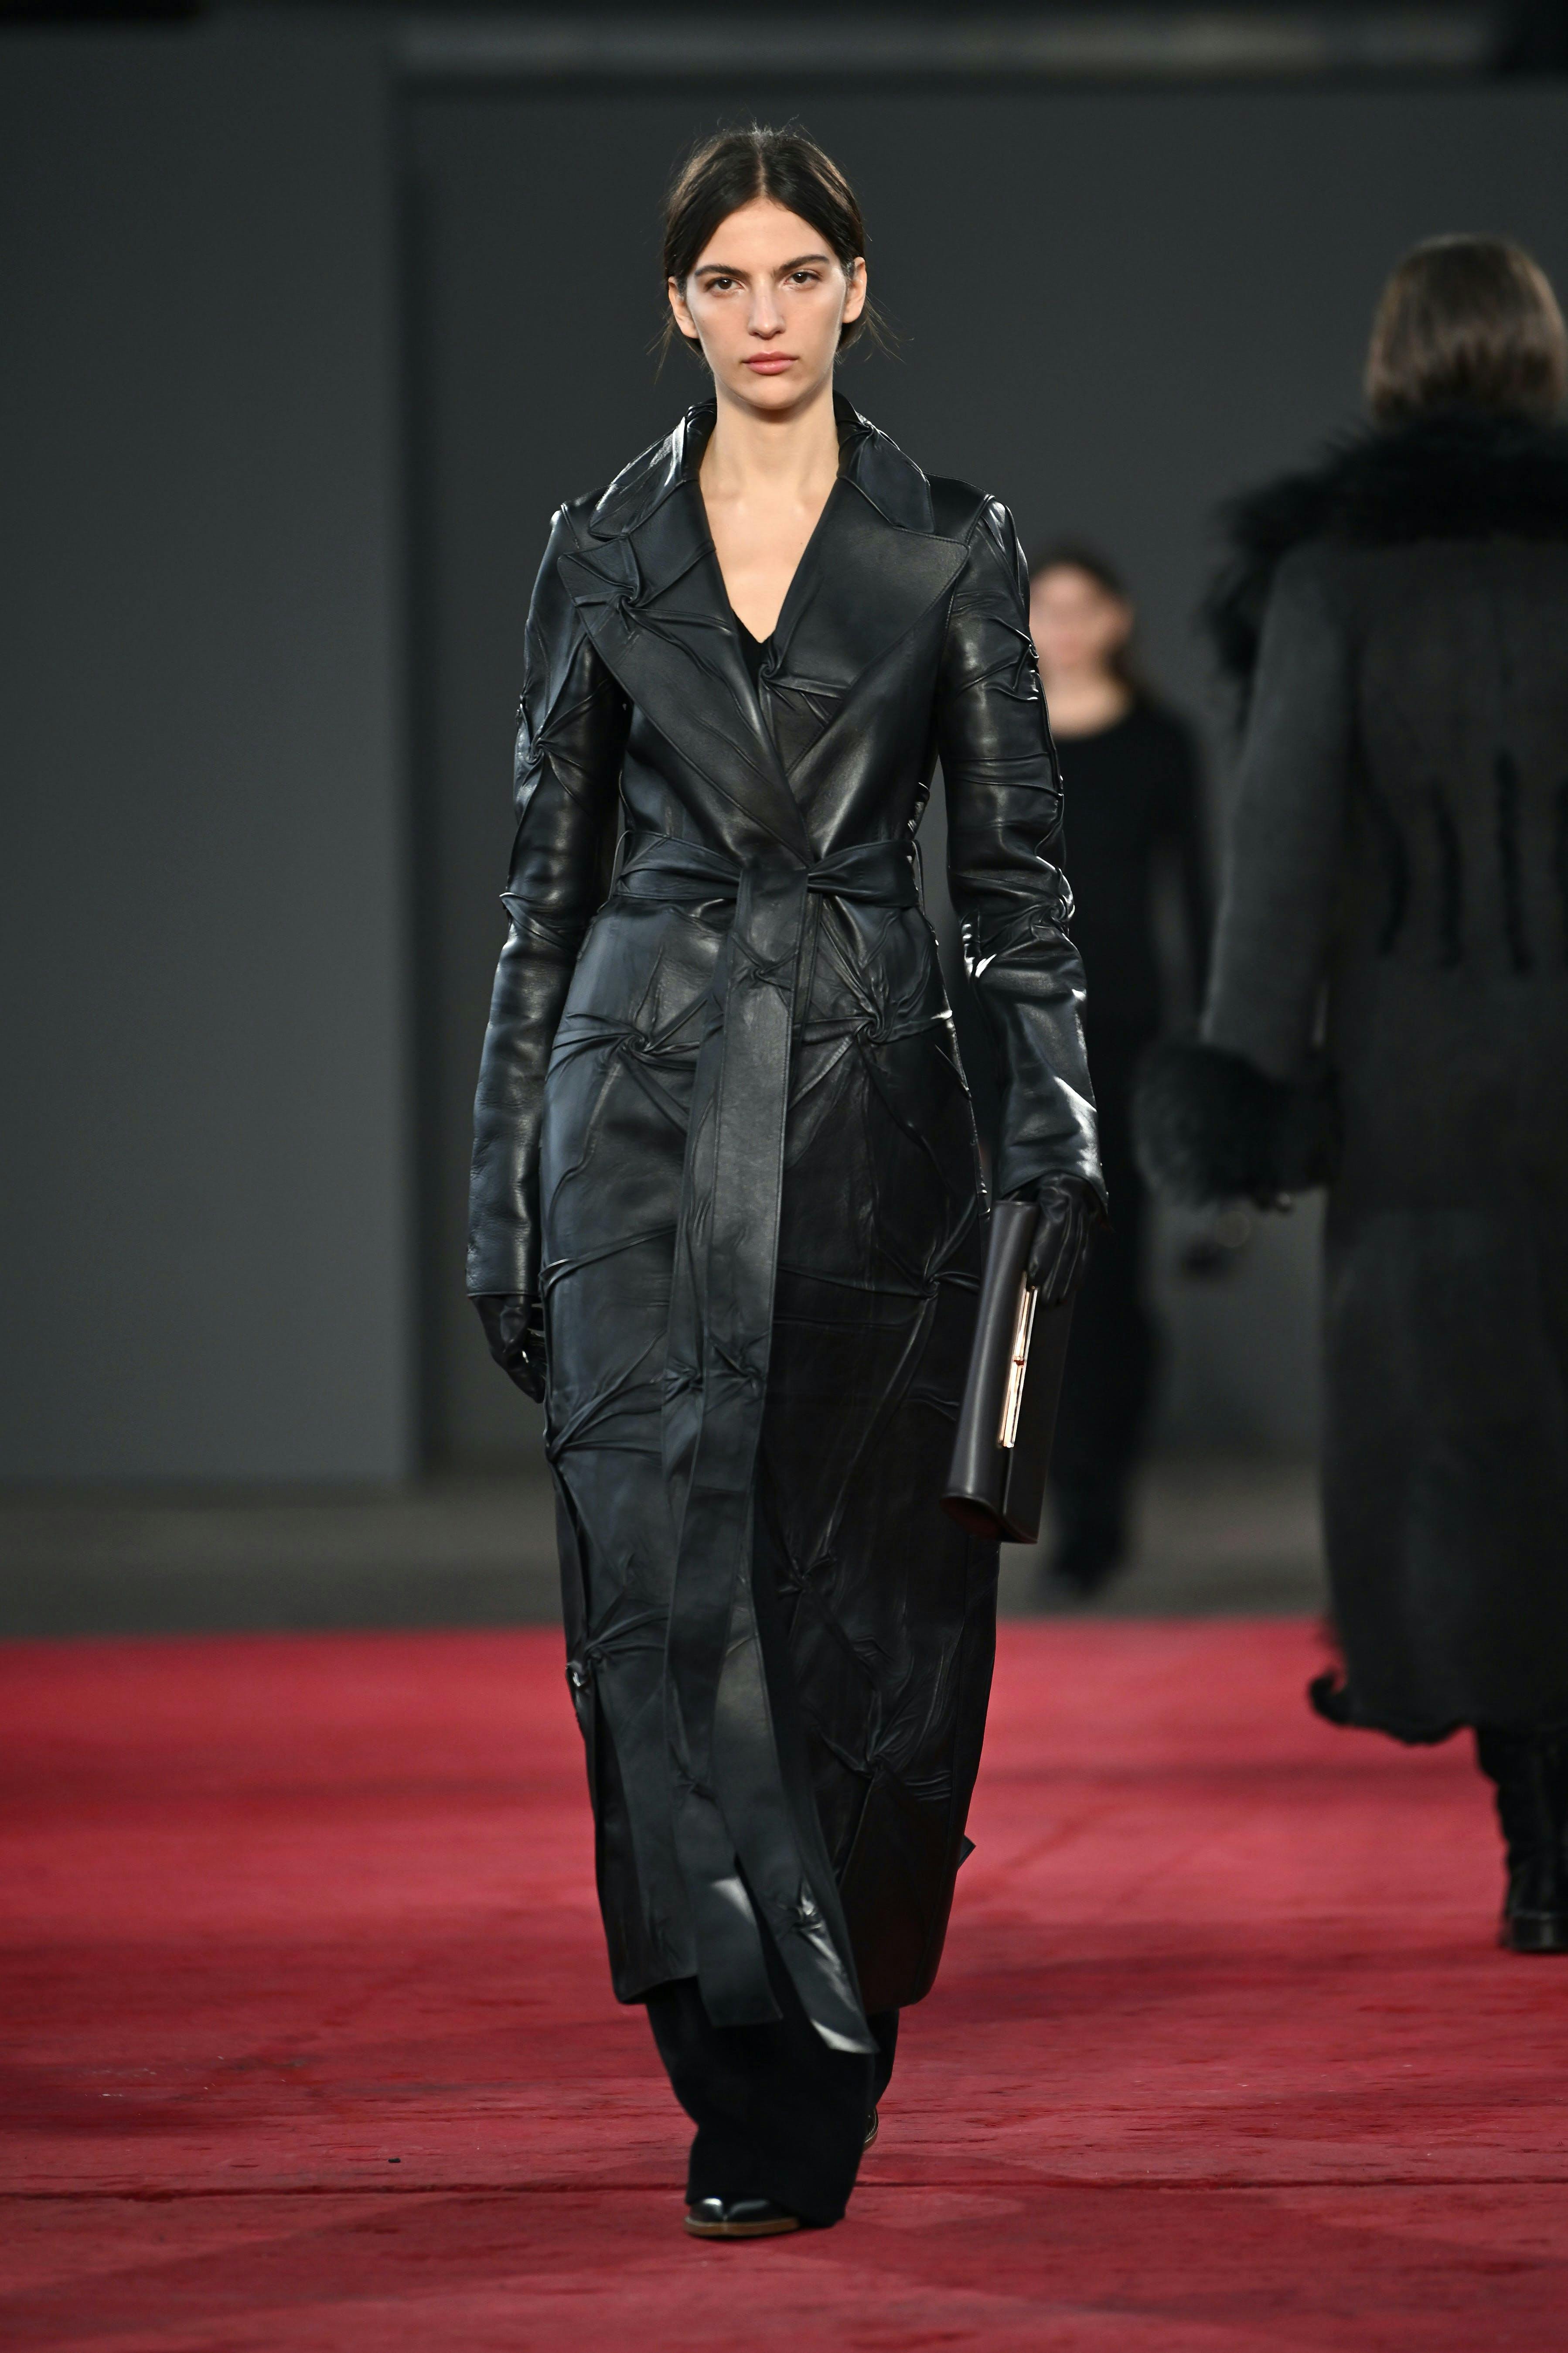 model on runway wearing black leather trench coat